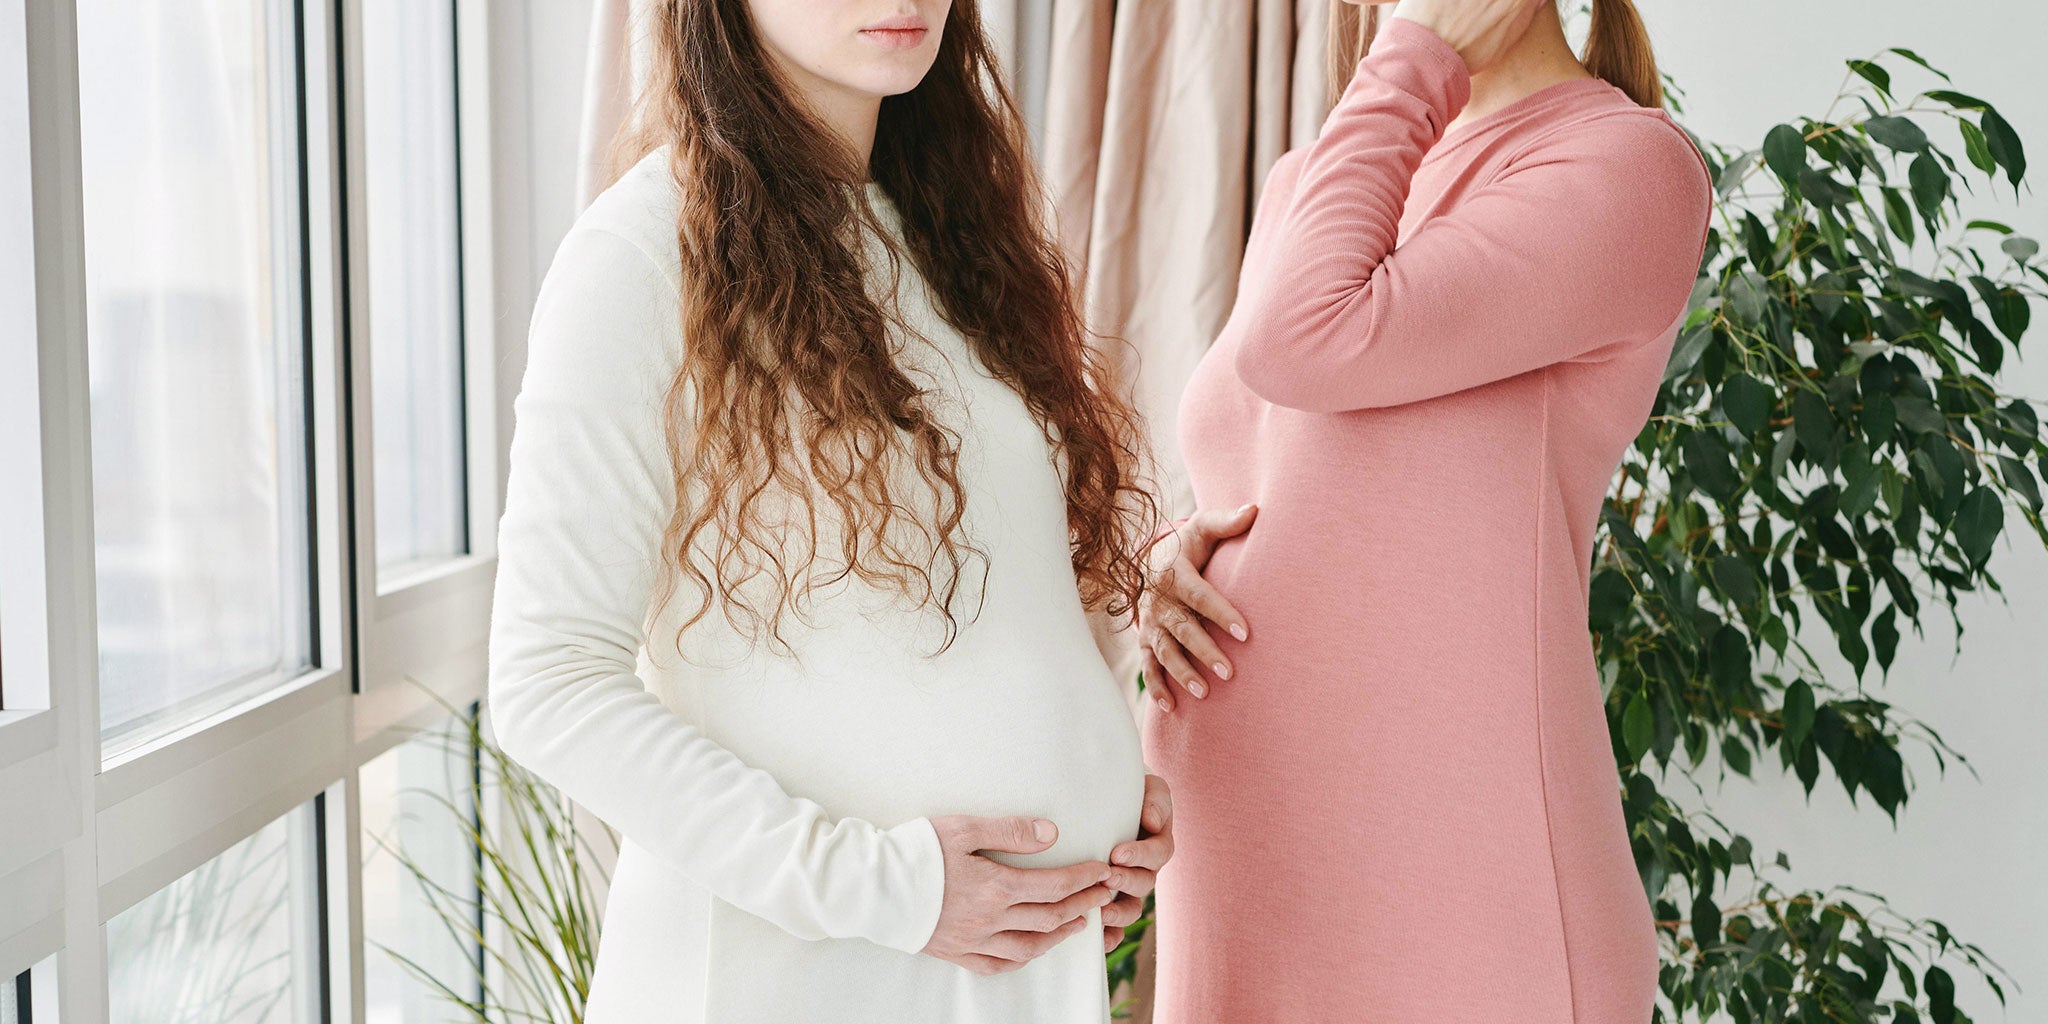 Pregnant women wearing neutral clothing